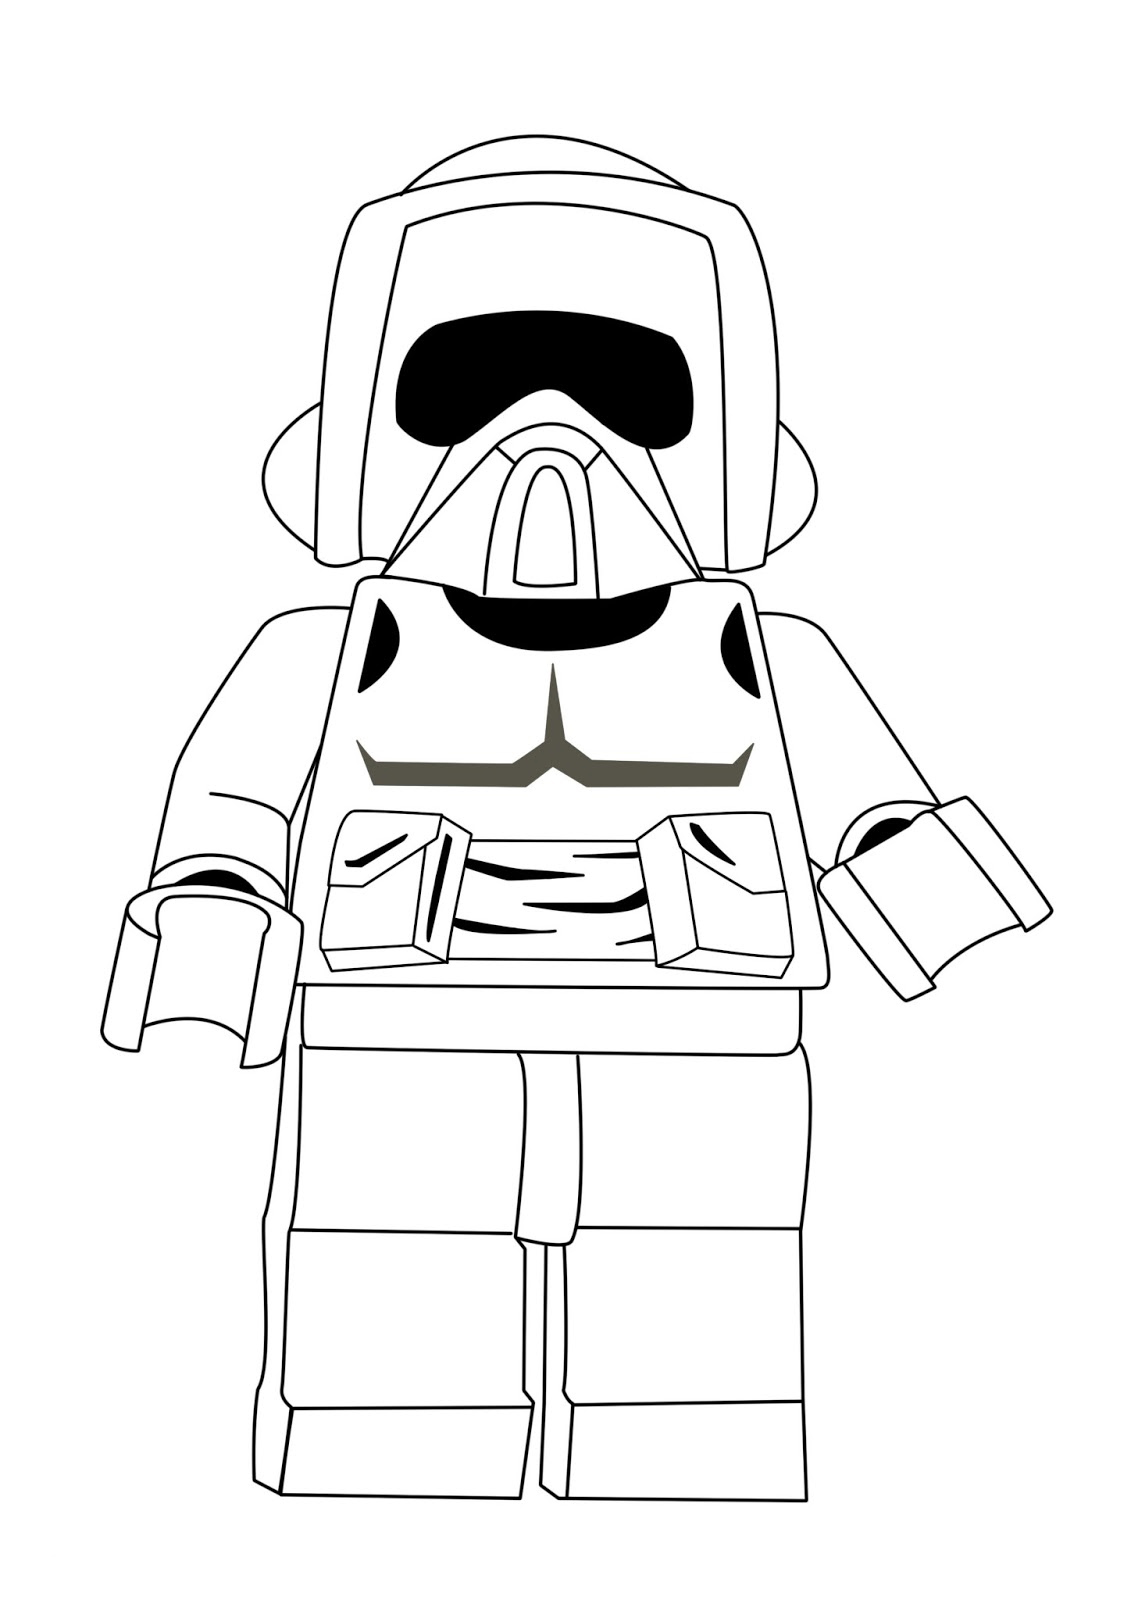 Download Lego Star Wars Coloring Pages Best Coloring Pages For Kids